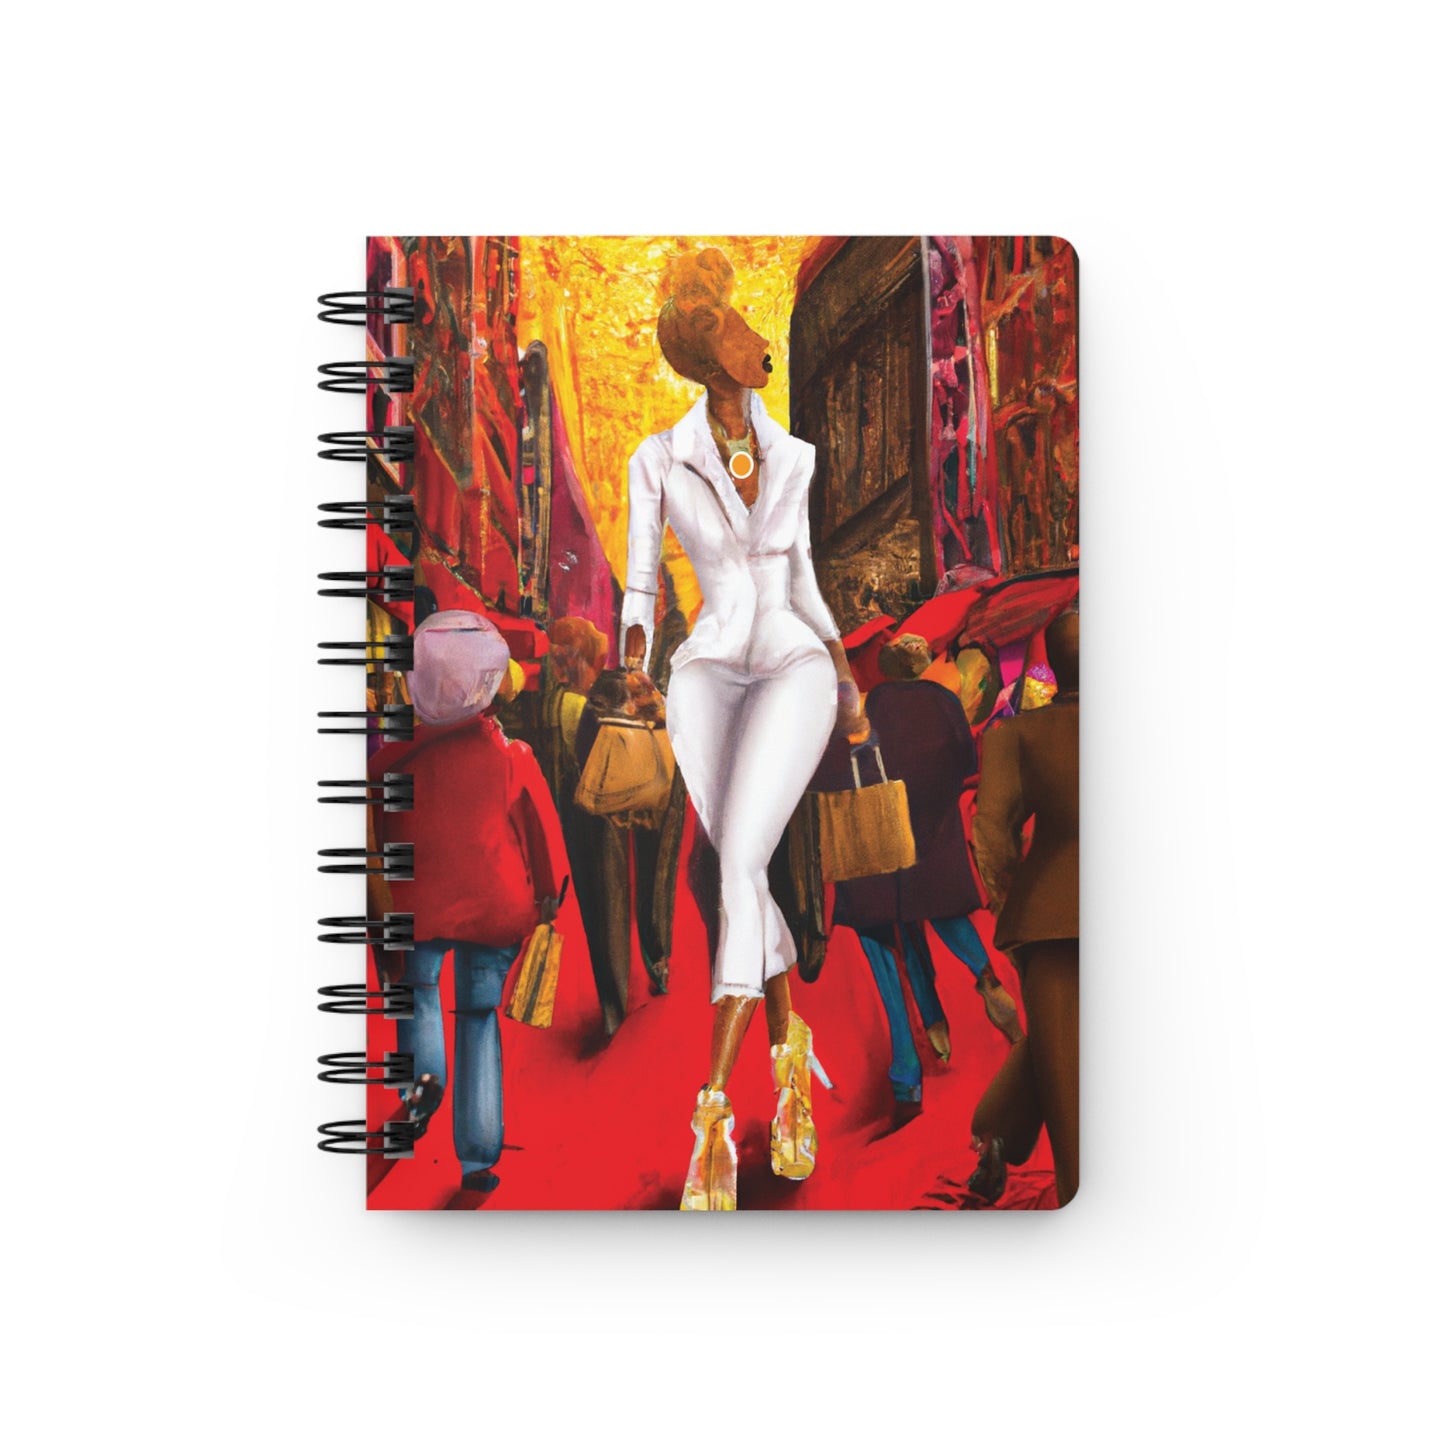 Flossy Kellie Spiral Bound Notebooks and Journals with 2023-2024 Year-at-a-Glance Calendar